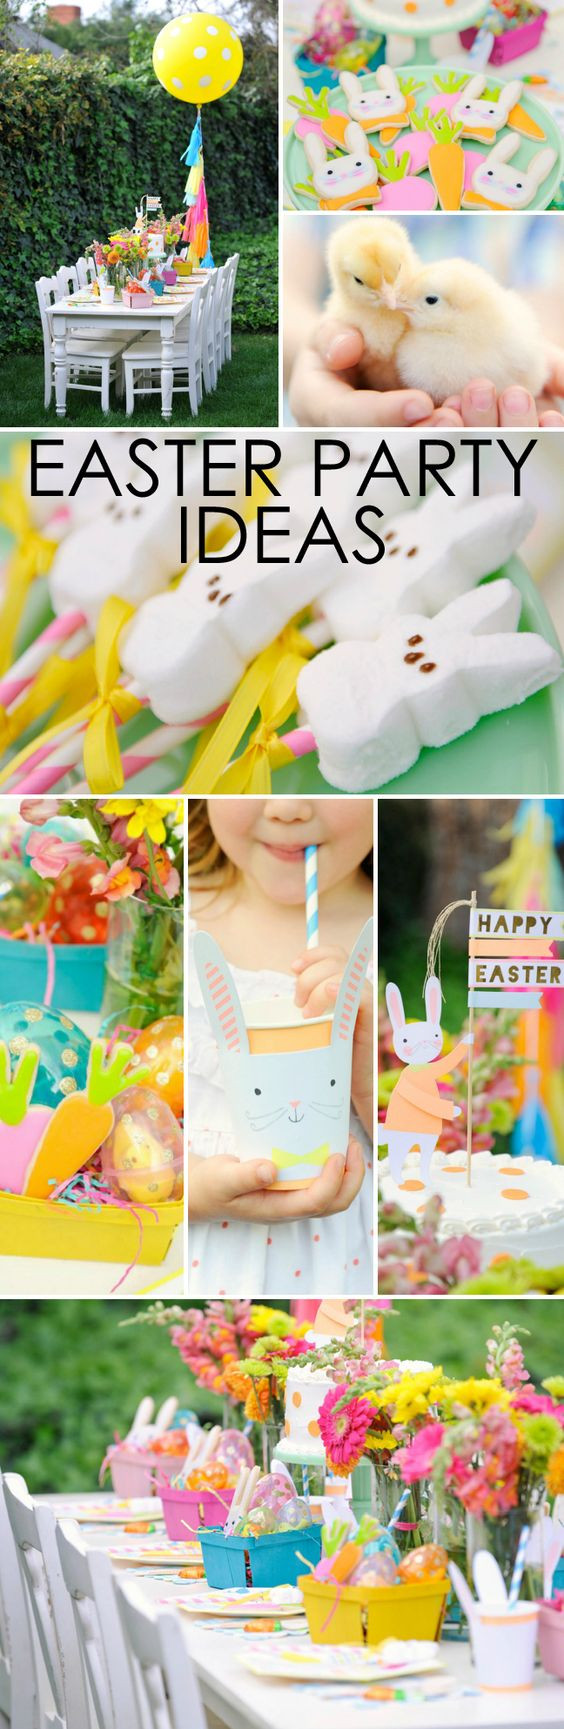 Easter Birthday Party Ideas Kids
 Plan a Bunny tastic Kids Easter Party